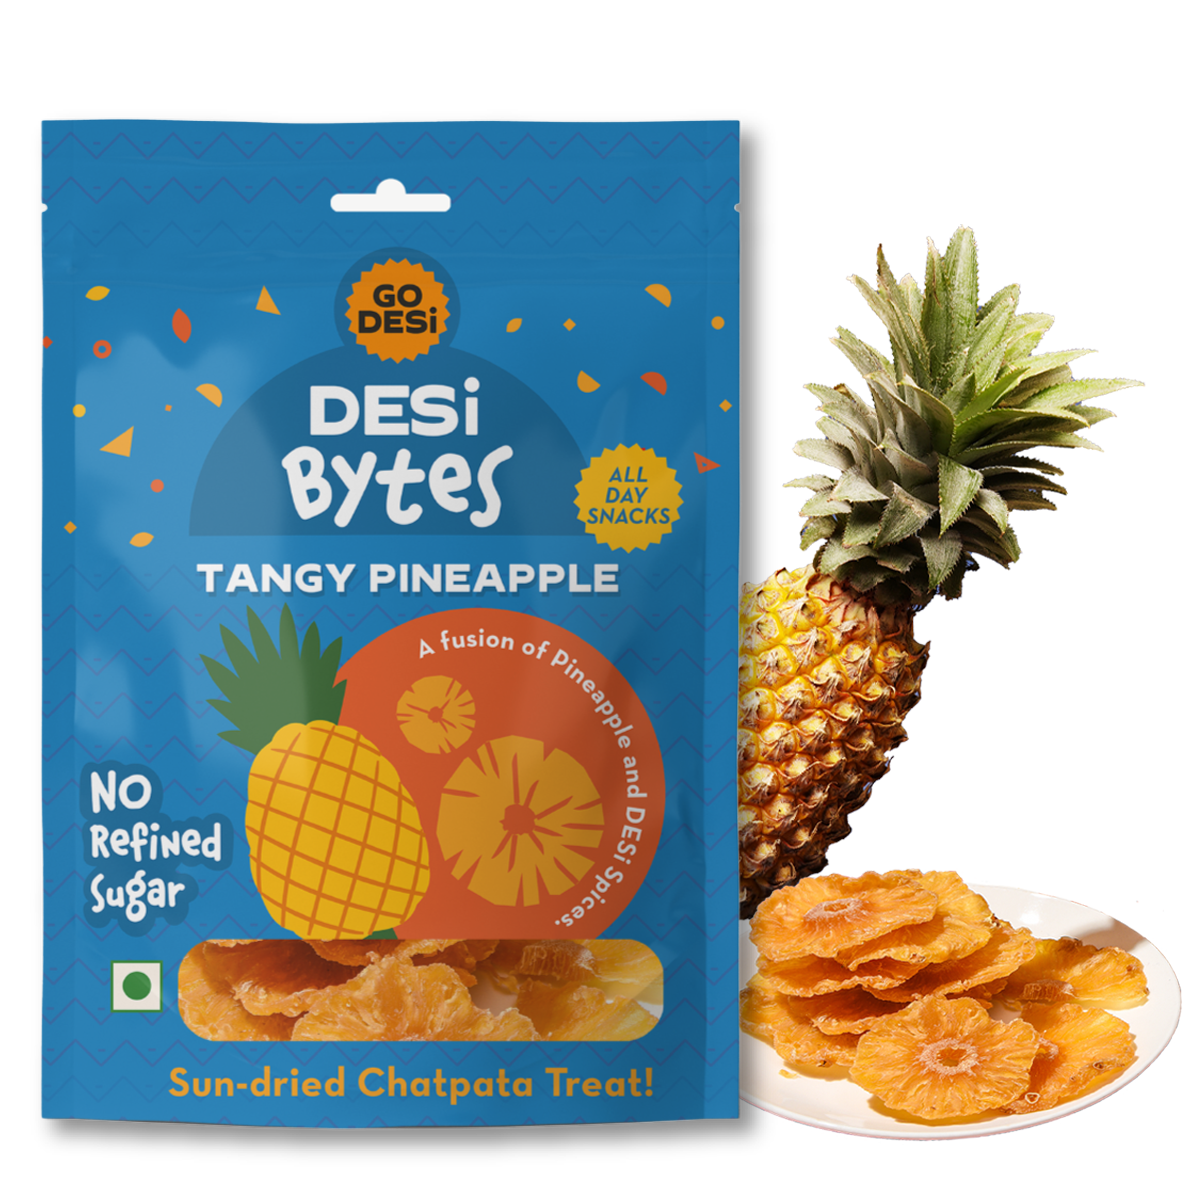 Tangy Pineapple Bytes